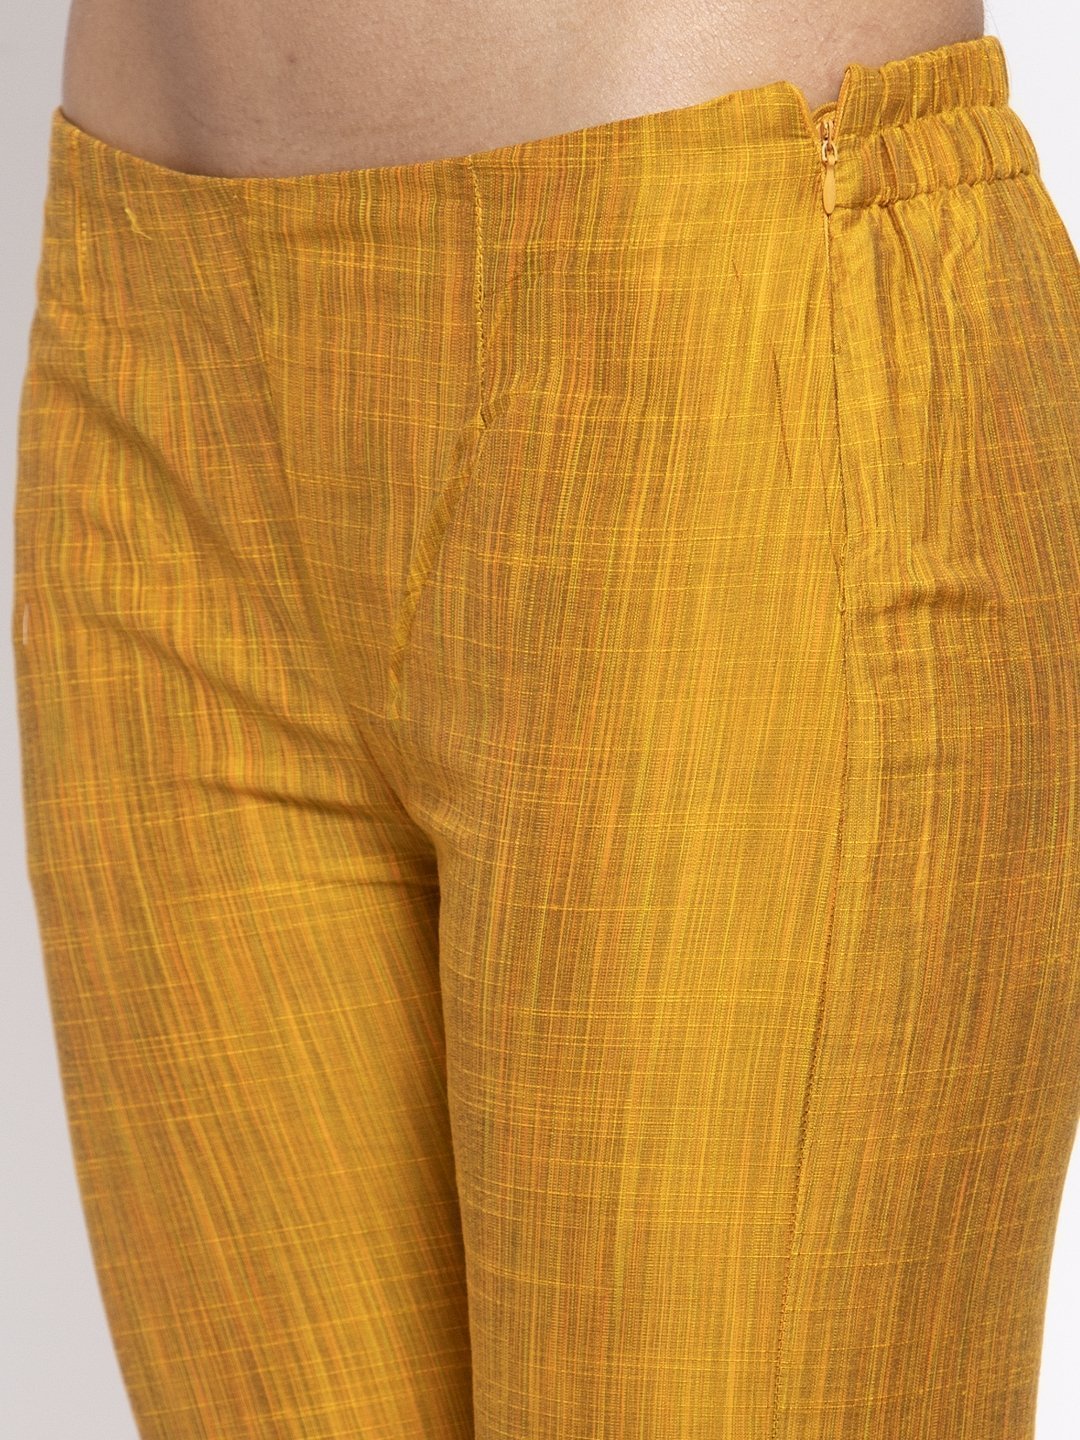 Women's Yellow Self Striped Kurta with Trousers & Floral Gorgette Dupatta - Jompers